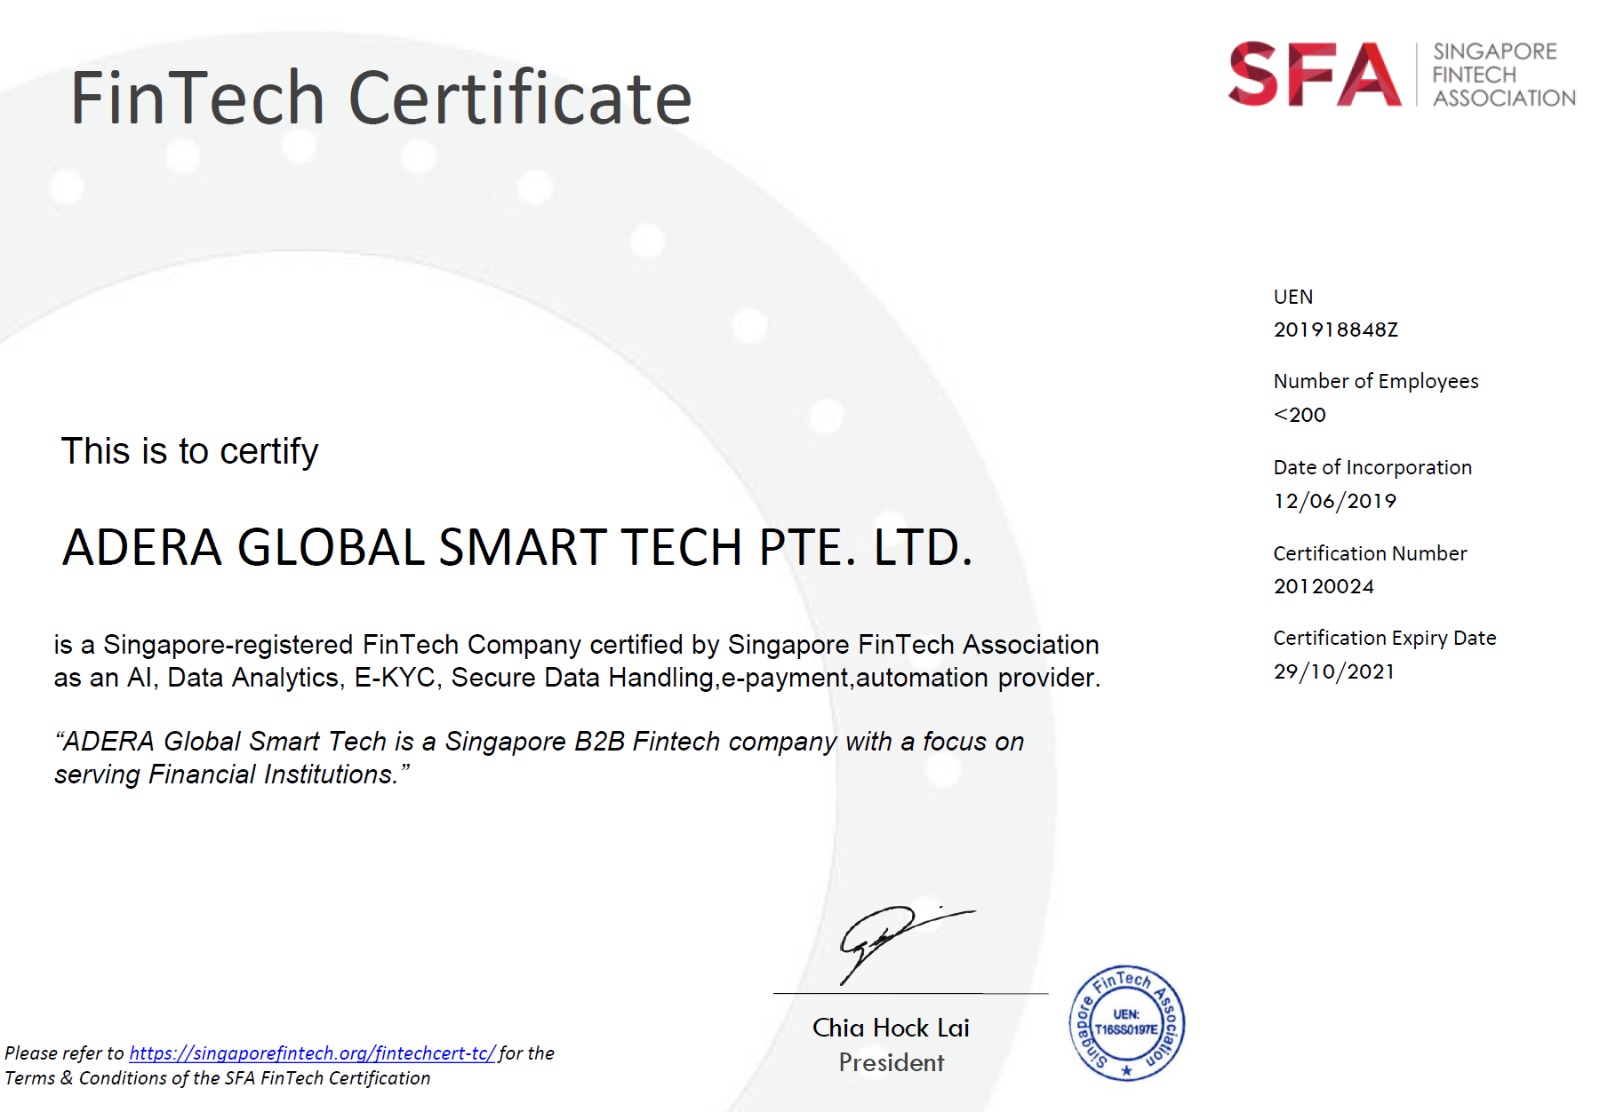 ADERA Global Smart Tech is now a certified, Singapore Fintech Company